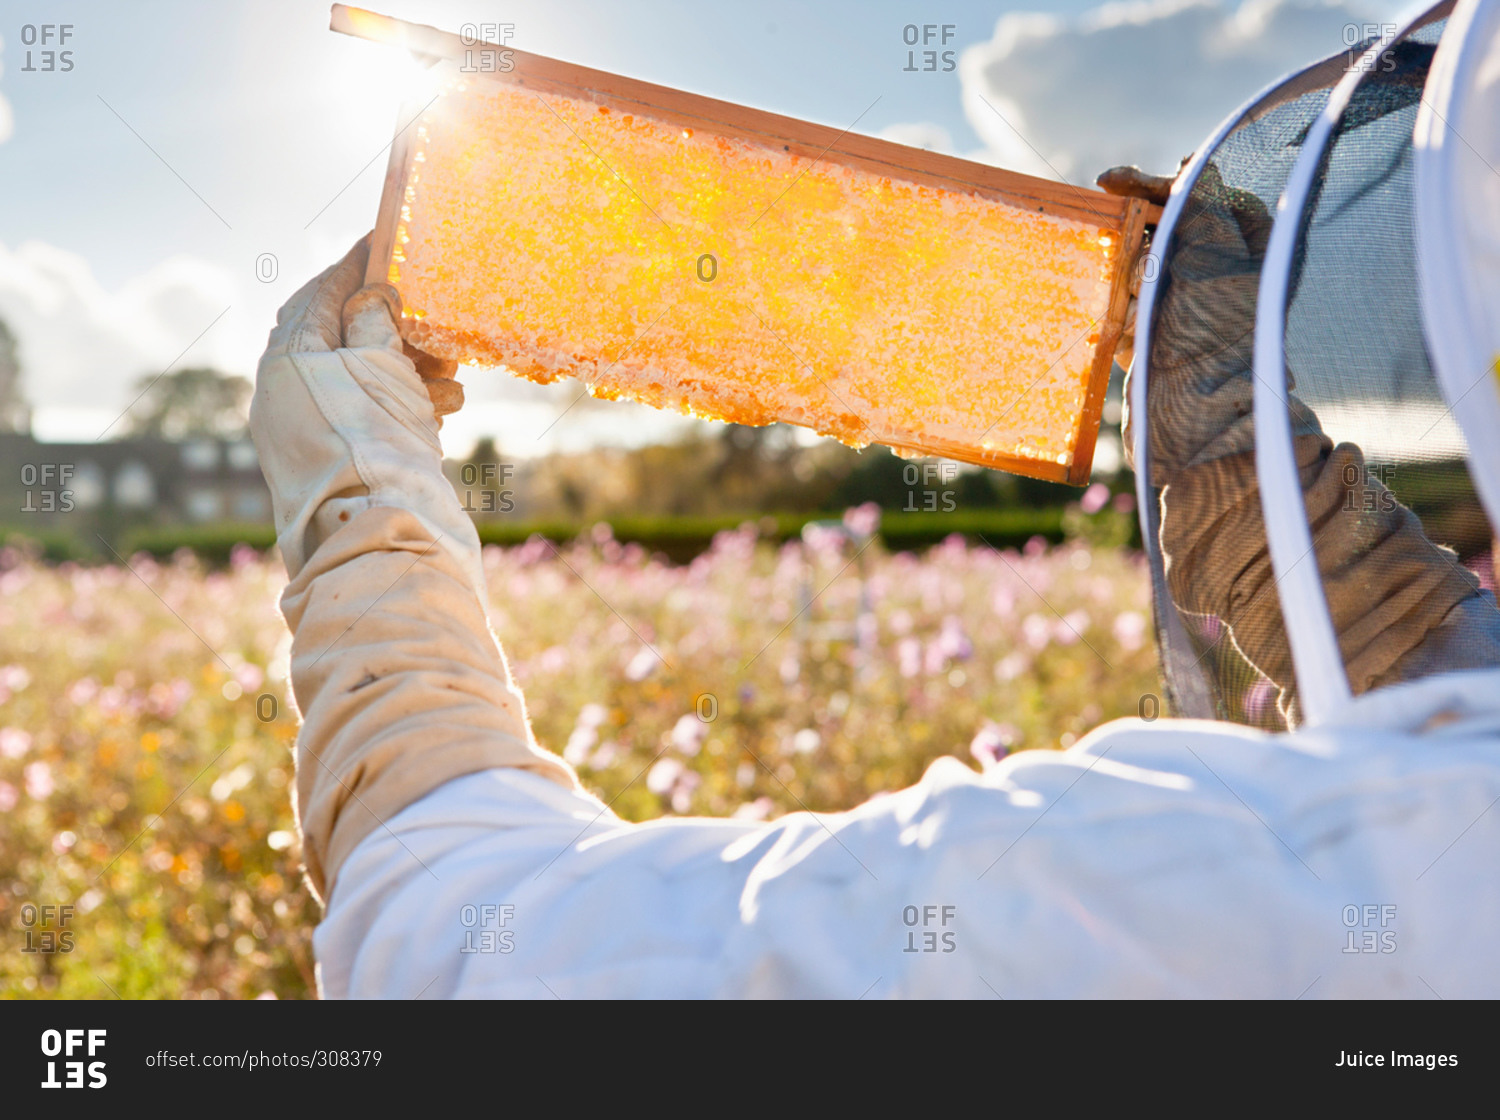 Beekeeper, holding beehive frame of honey up to the sun, in field full of flowers